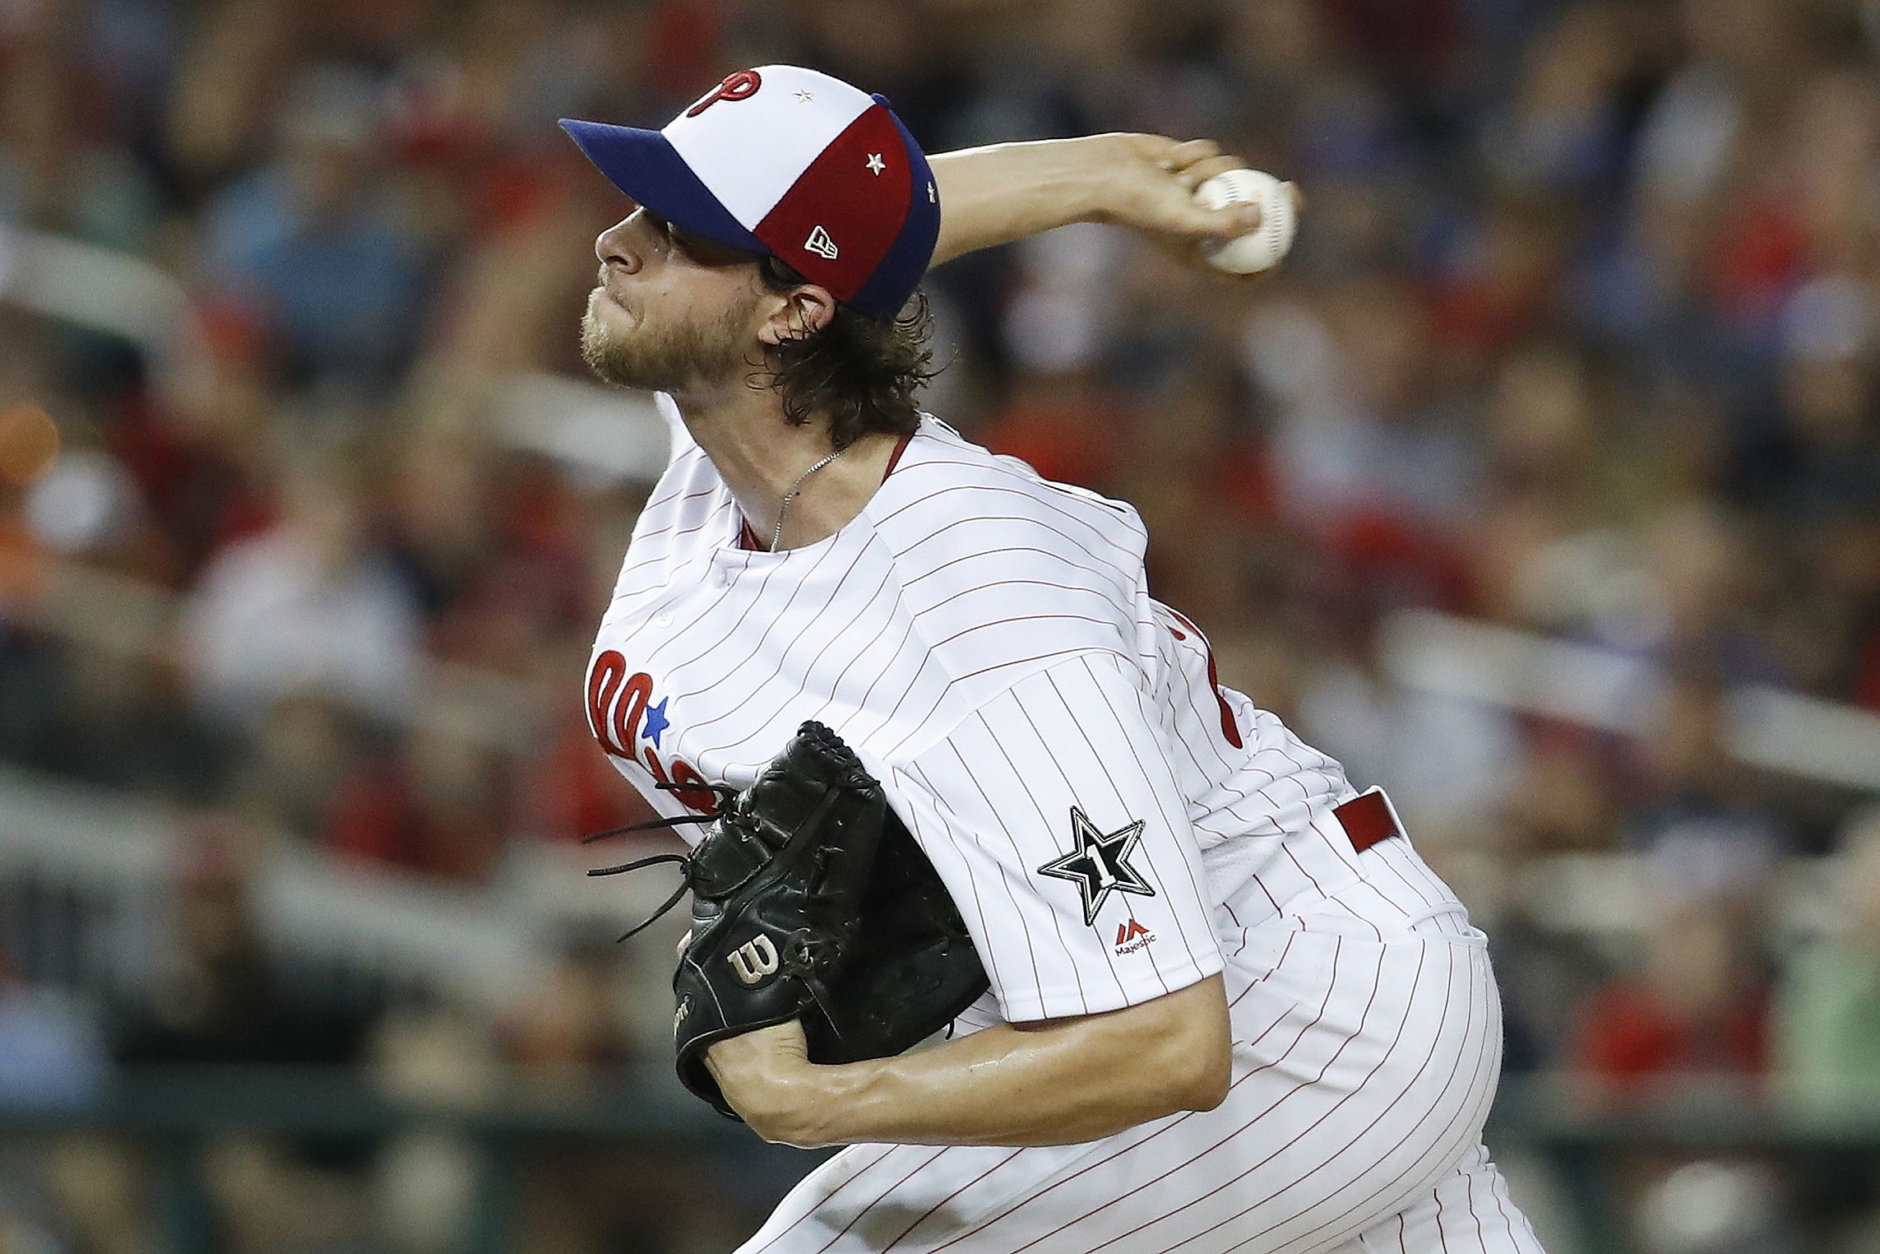 Philadelphia Phillies pitcher Aaron Nola (27) works during the fifth inning at the Major League Baseball All-star Game, Tuesday, July 17, 2018 in Washington. (AP Photo/Alex Brandon)